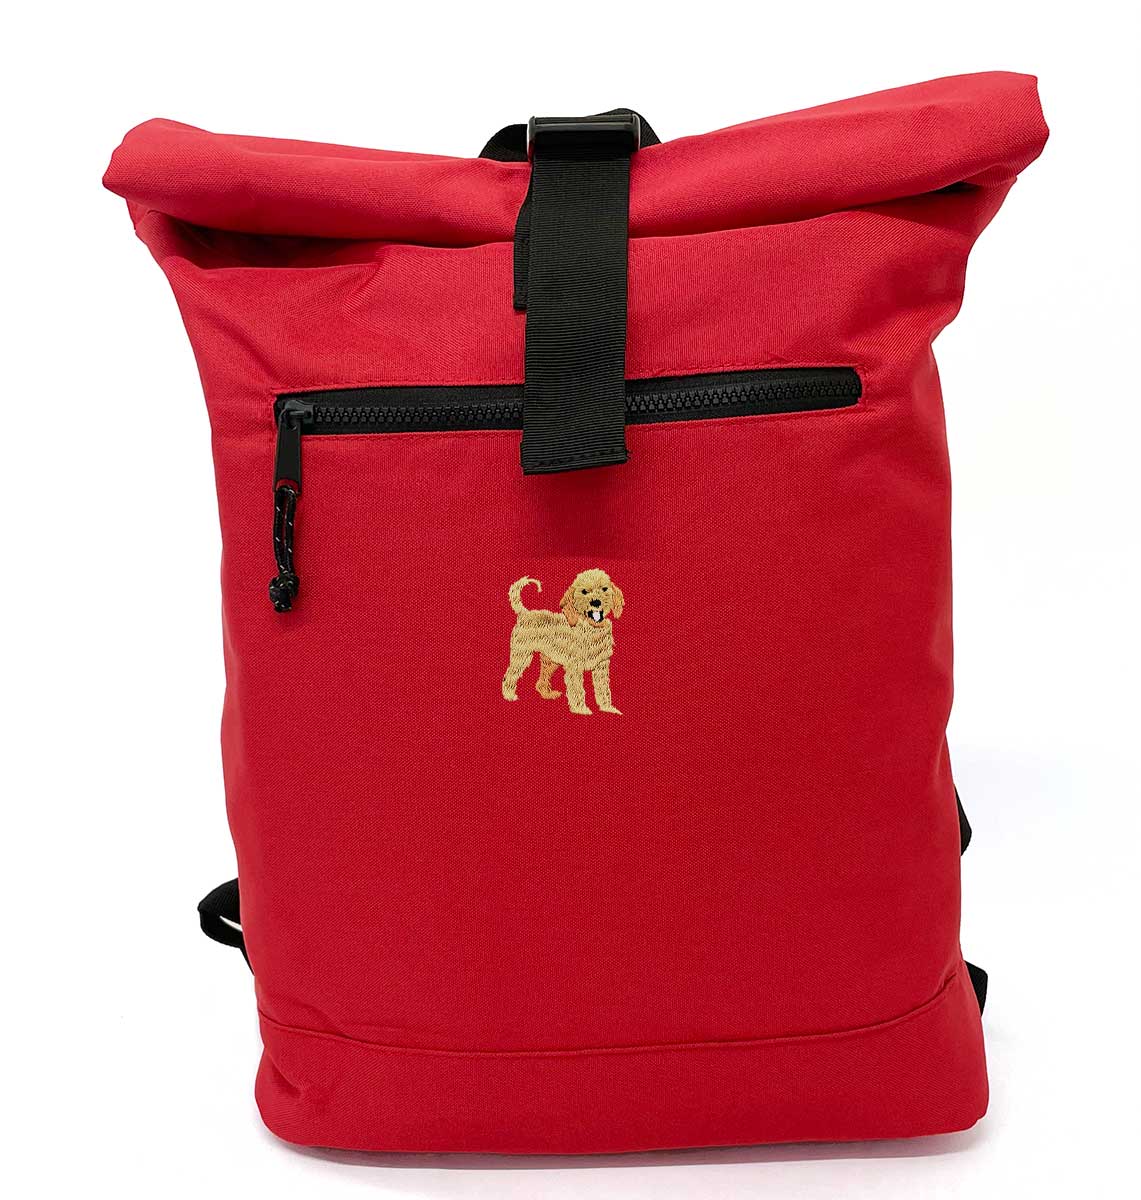 Labradoodle Beach Roll-top Recycled Backpack - Blue Panda